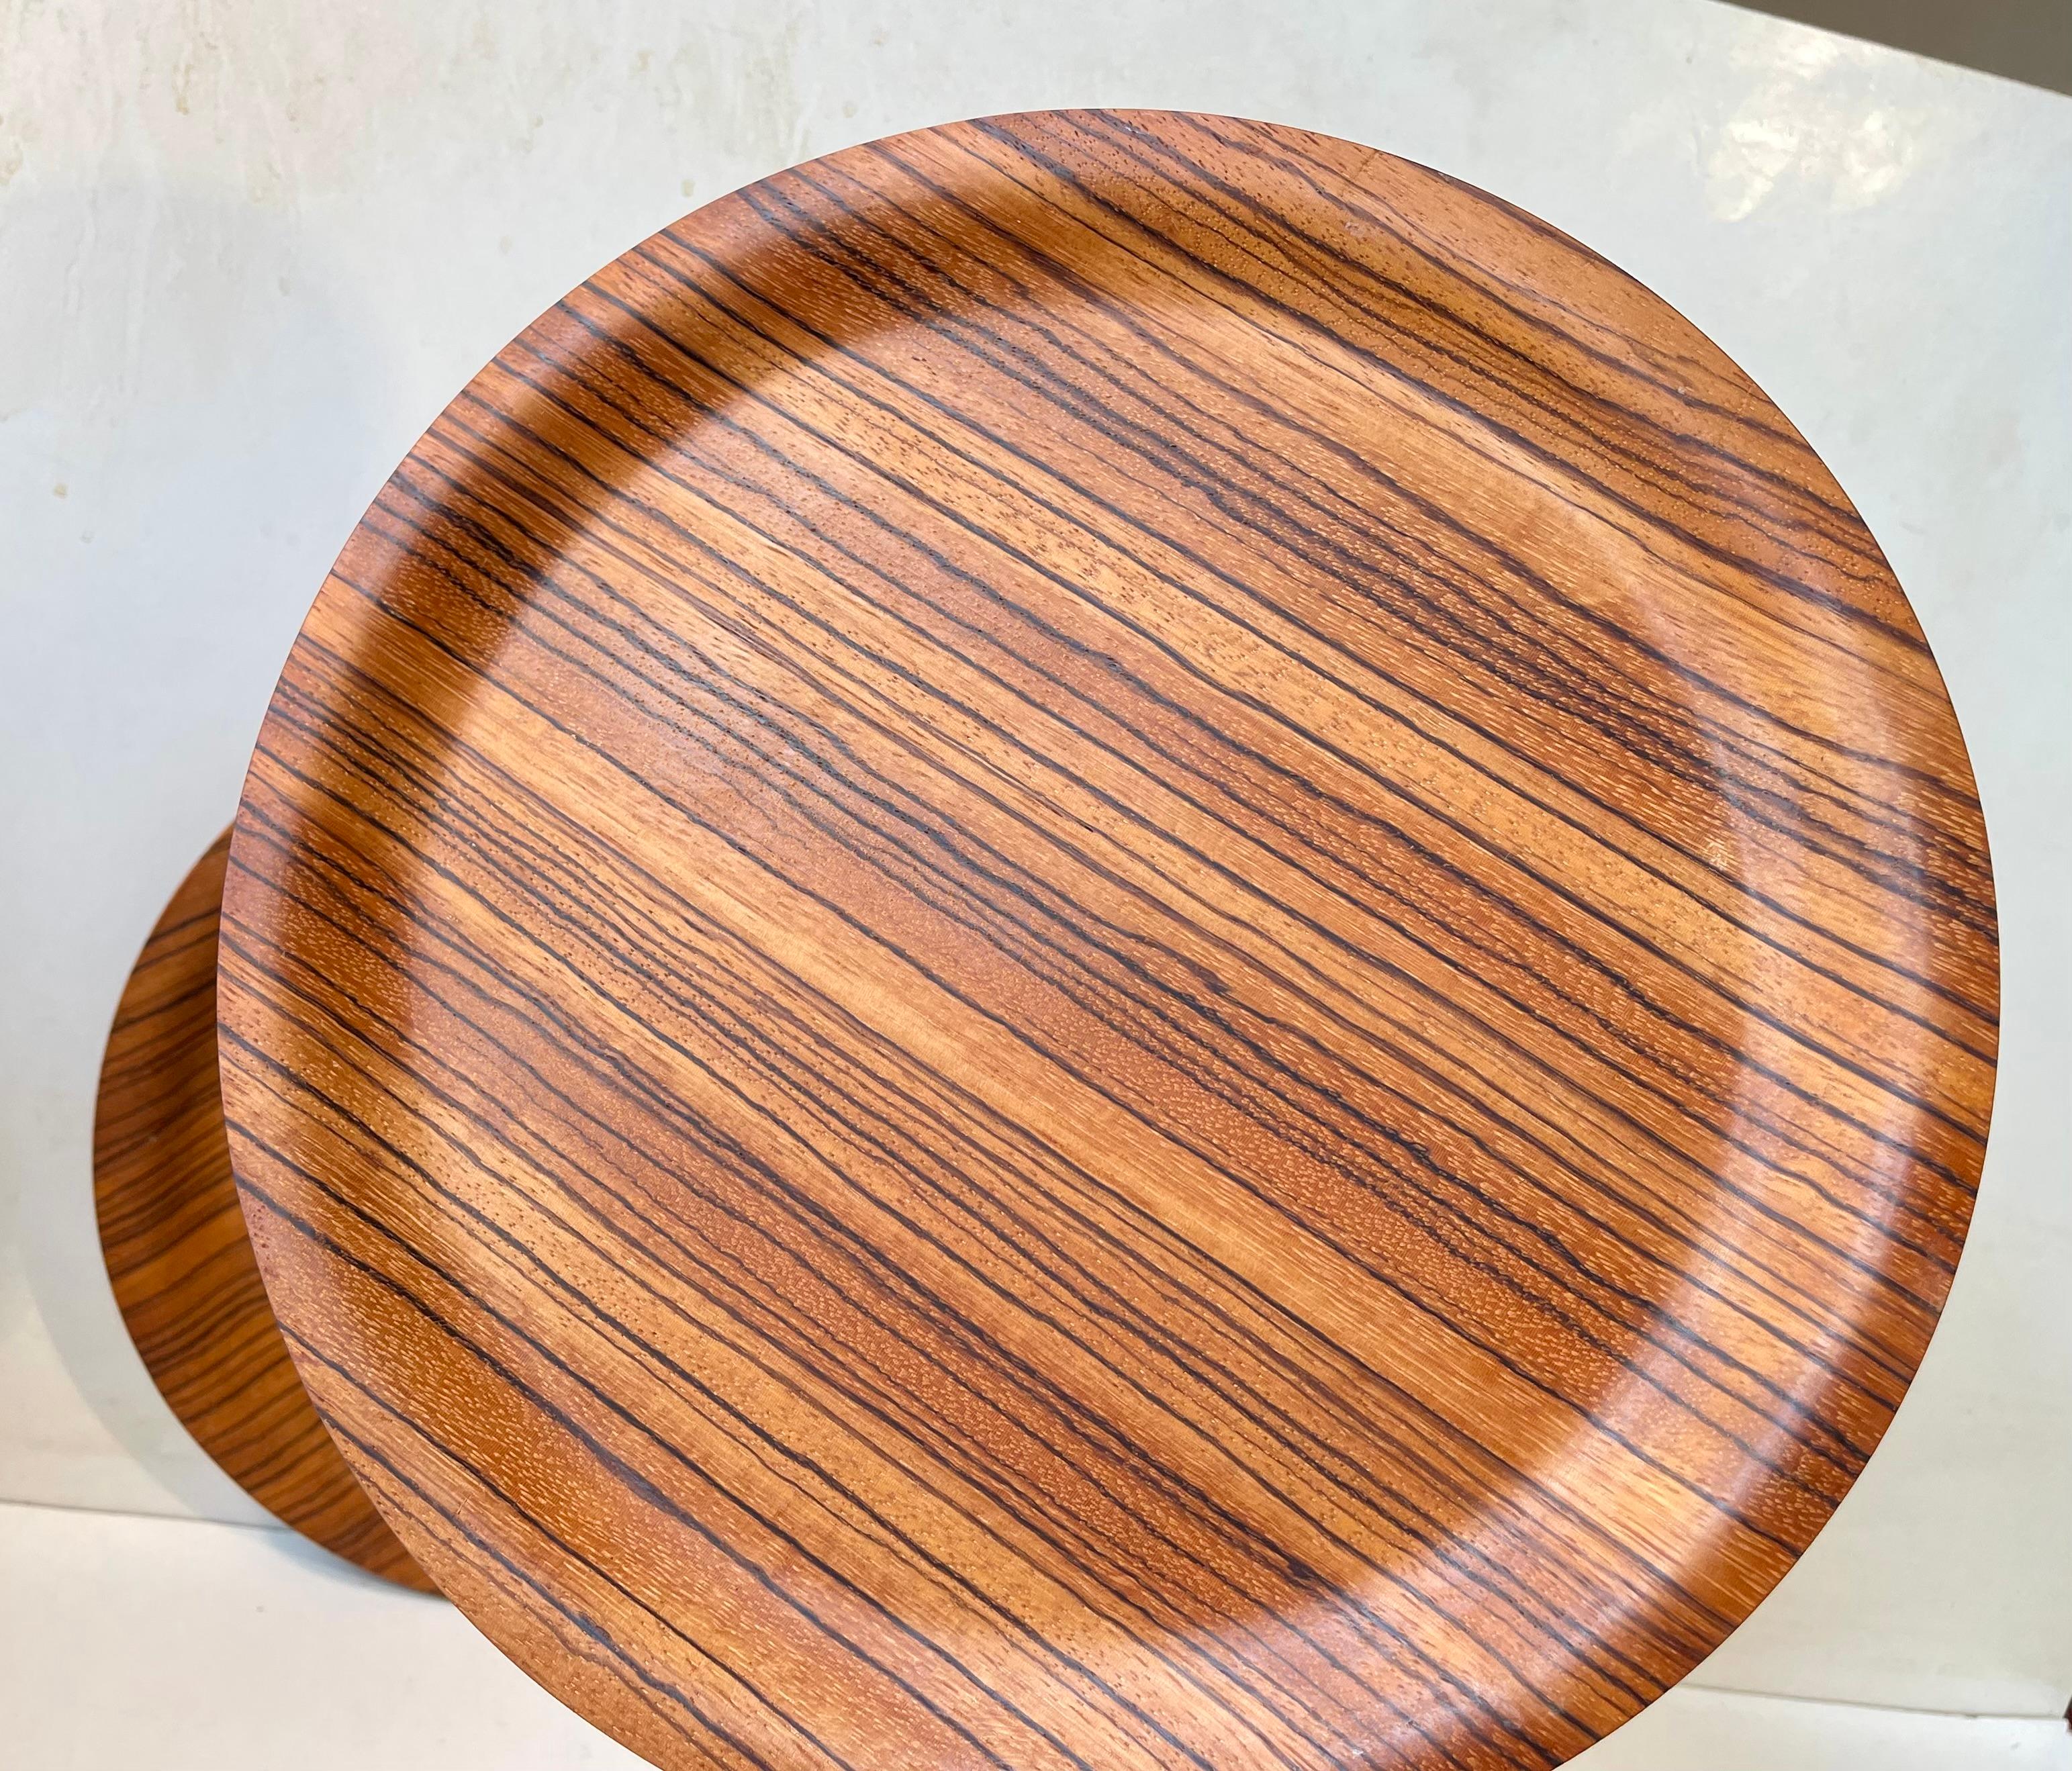 12 Scandinavian Modern Plates in Zebrawood, 1960s In Good Condition For Sale In Esbjerg, DK